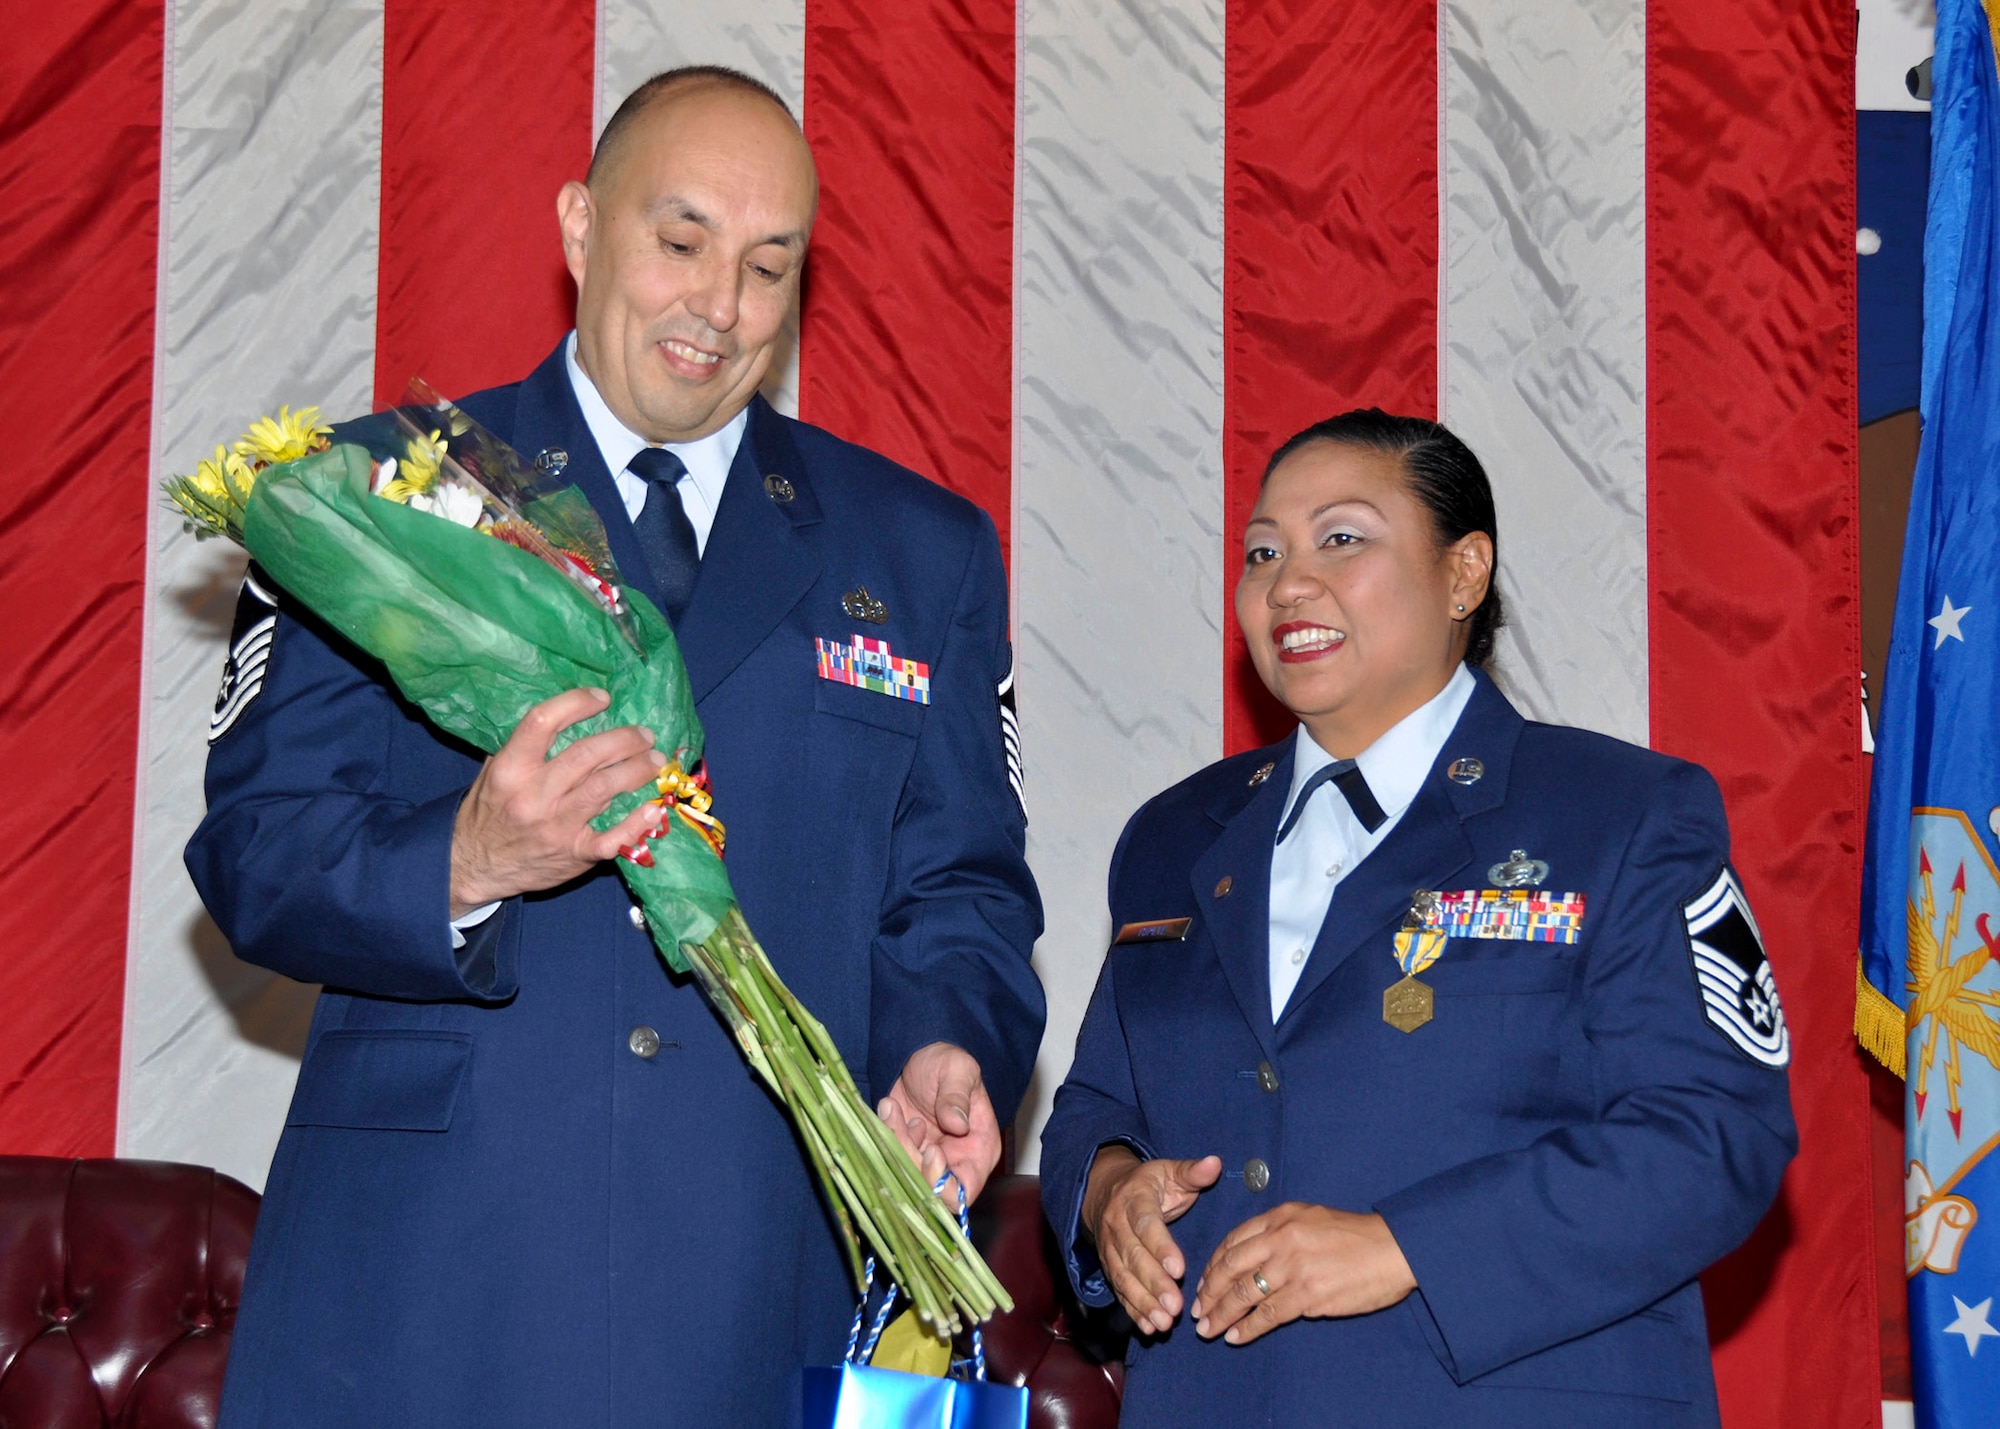 TRAVIS AIR FORCE BASE, Calif. -- Master Sgt. Robert Topete, 55th Aerial Port Squadron, attaches a retirement pin to his wife's lapel, Senior Master Sgt. Dahlia Topete, on the occasion of her retirement from the U.S. Air Force Reserve Nov. 16, 2013, at Travis Air Force Base, Calif. (U.S. Air Force photo by Tech. Sgt. Rachel Martinez/Released)